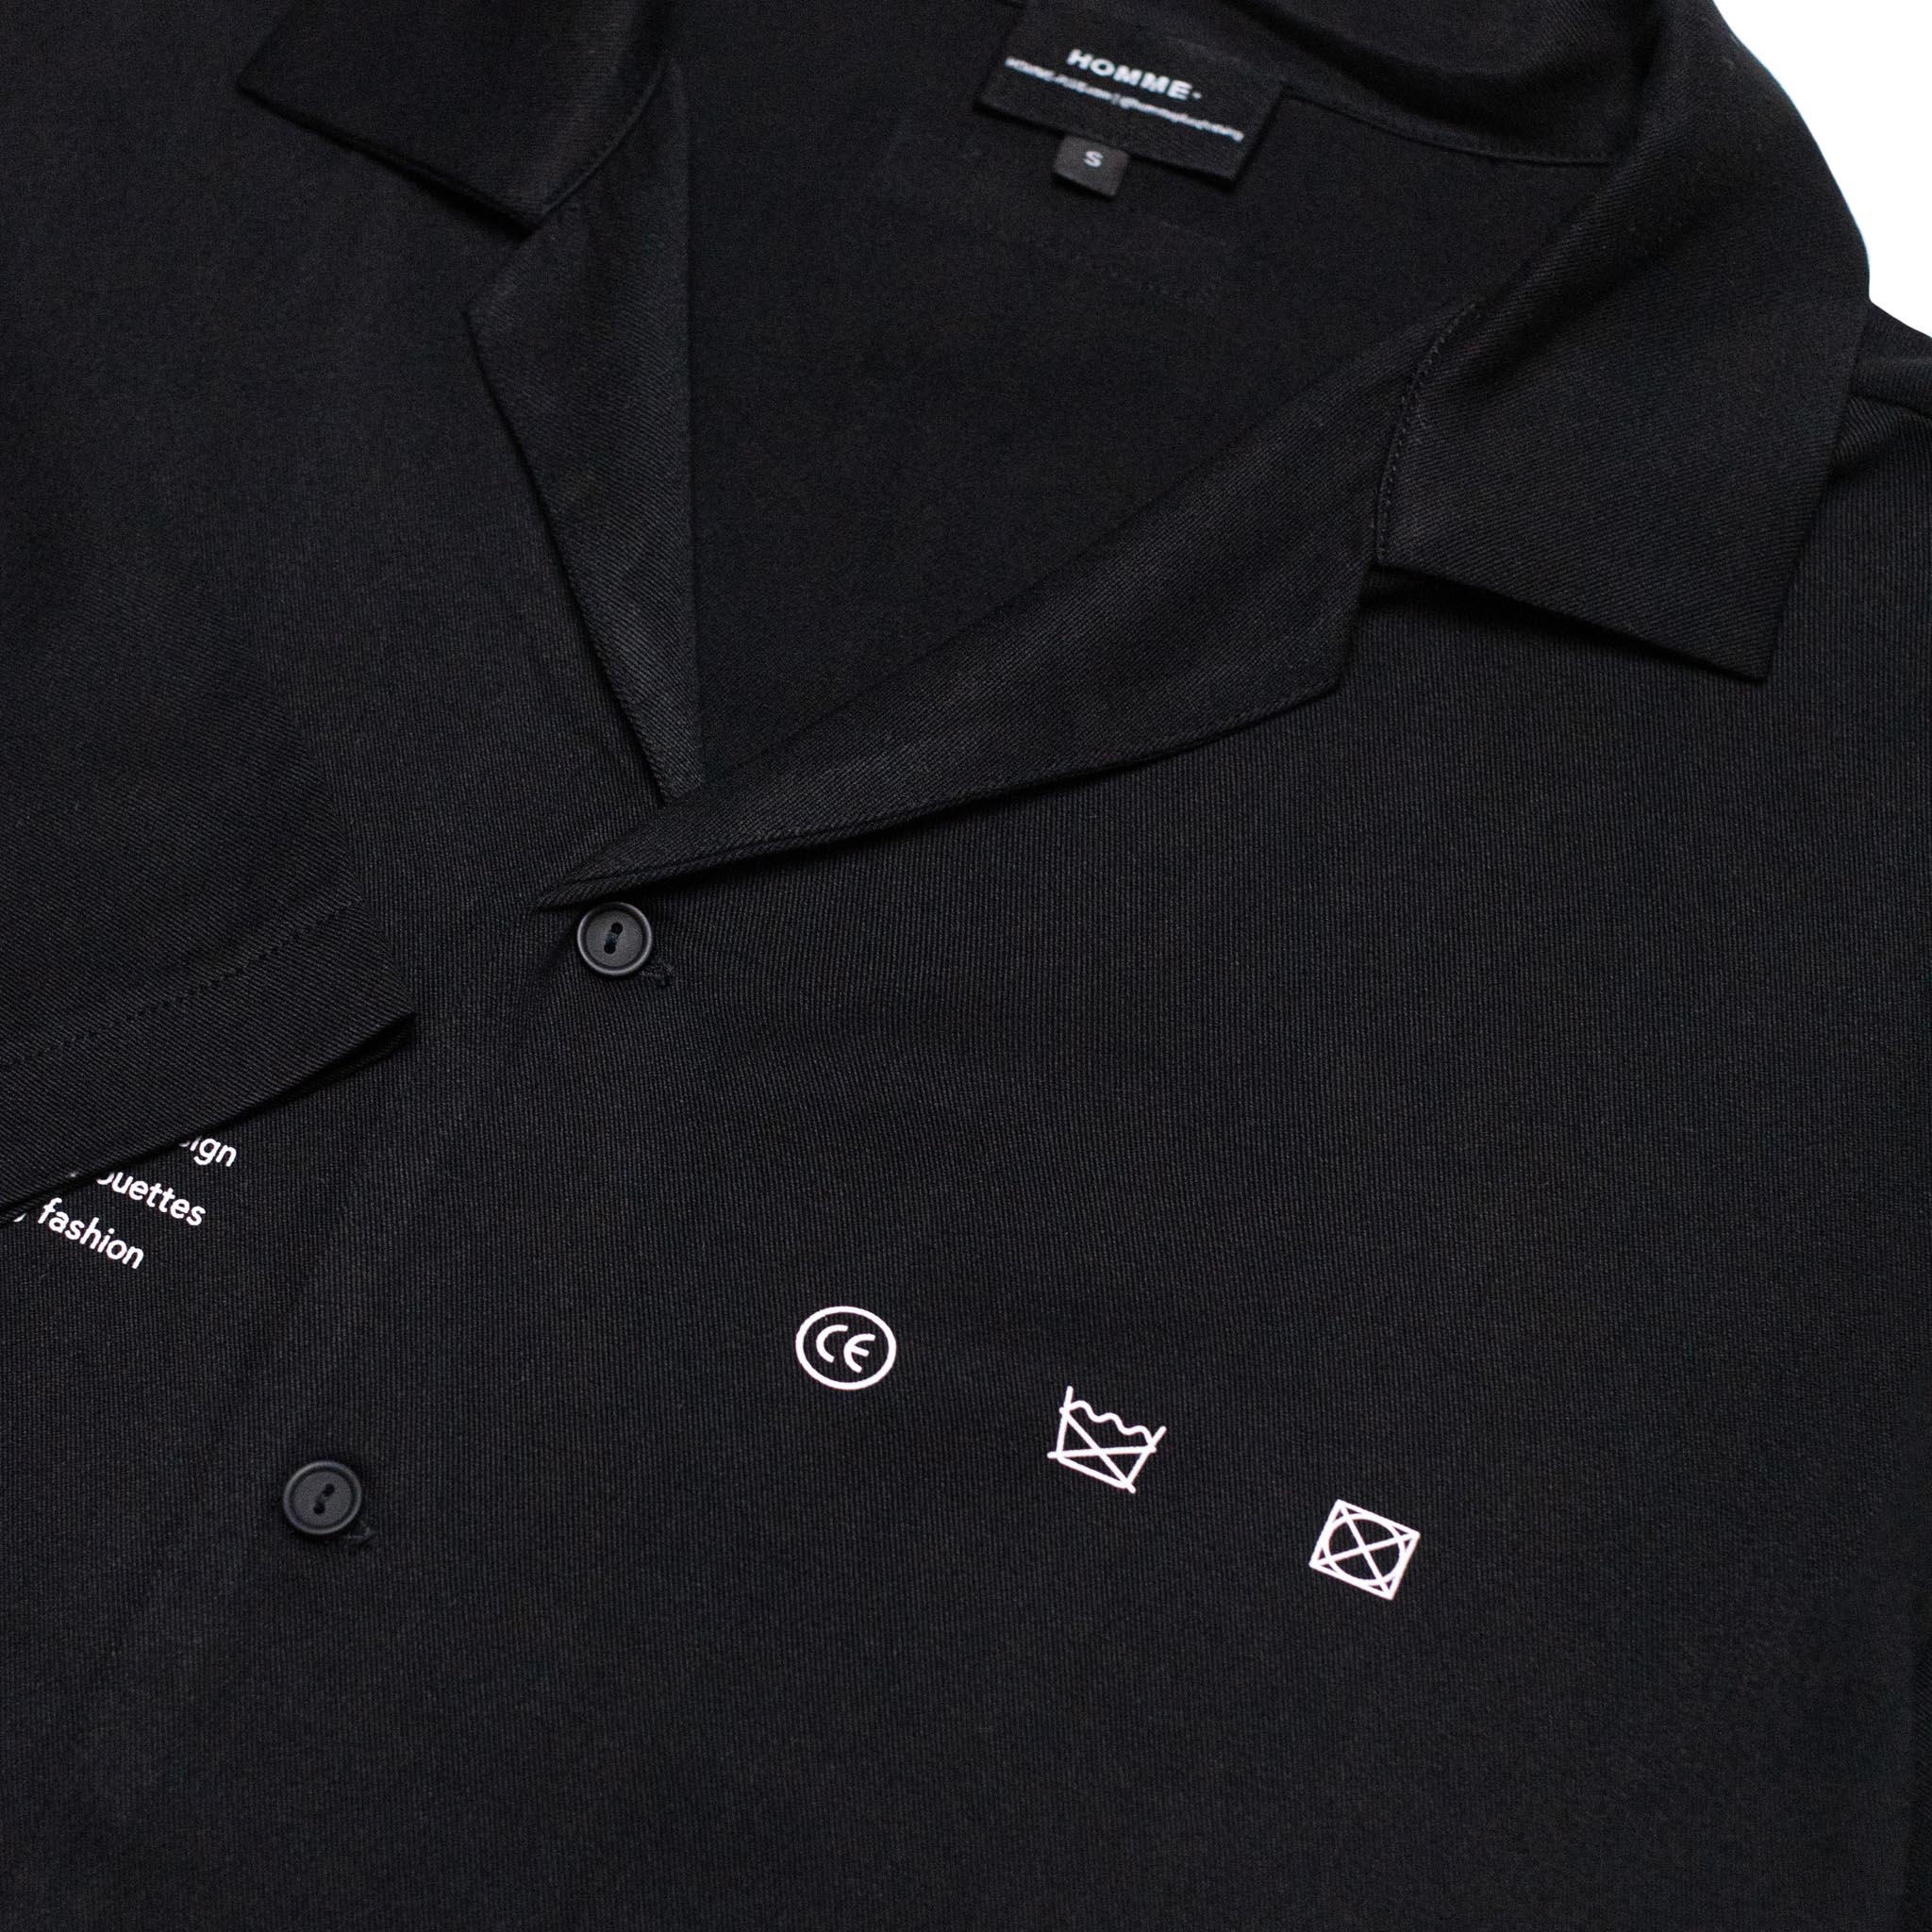 HOMME+ Loose Fitting Camp Shirt Black